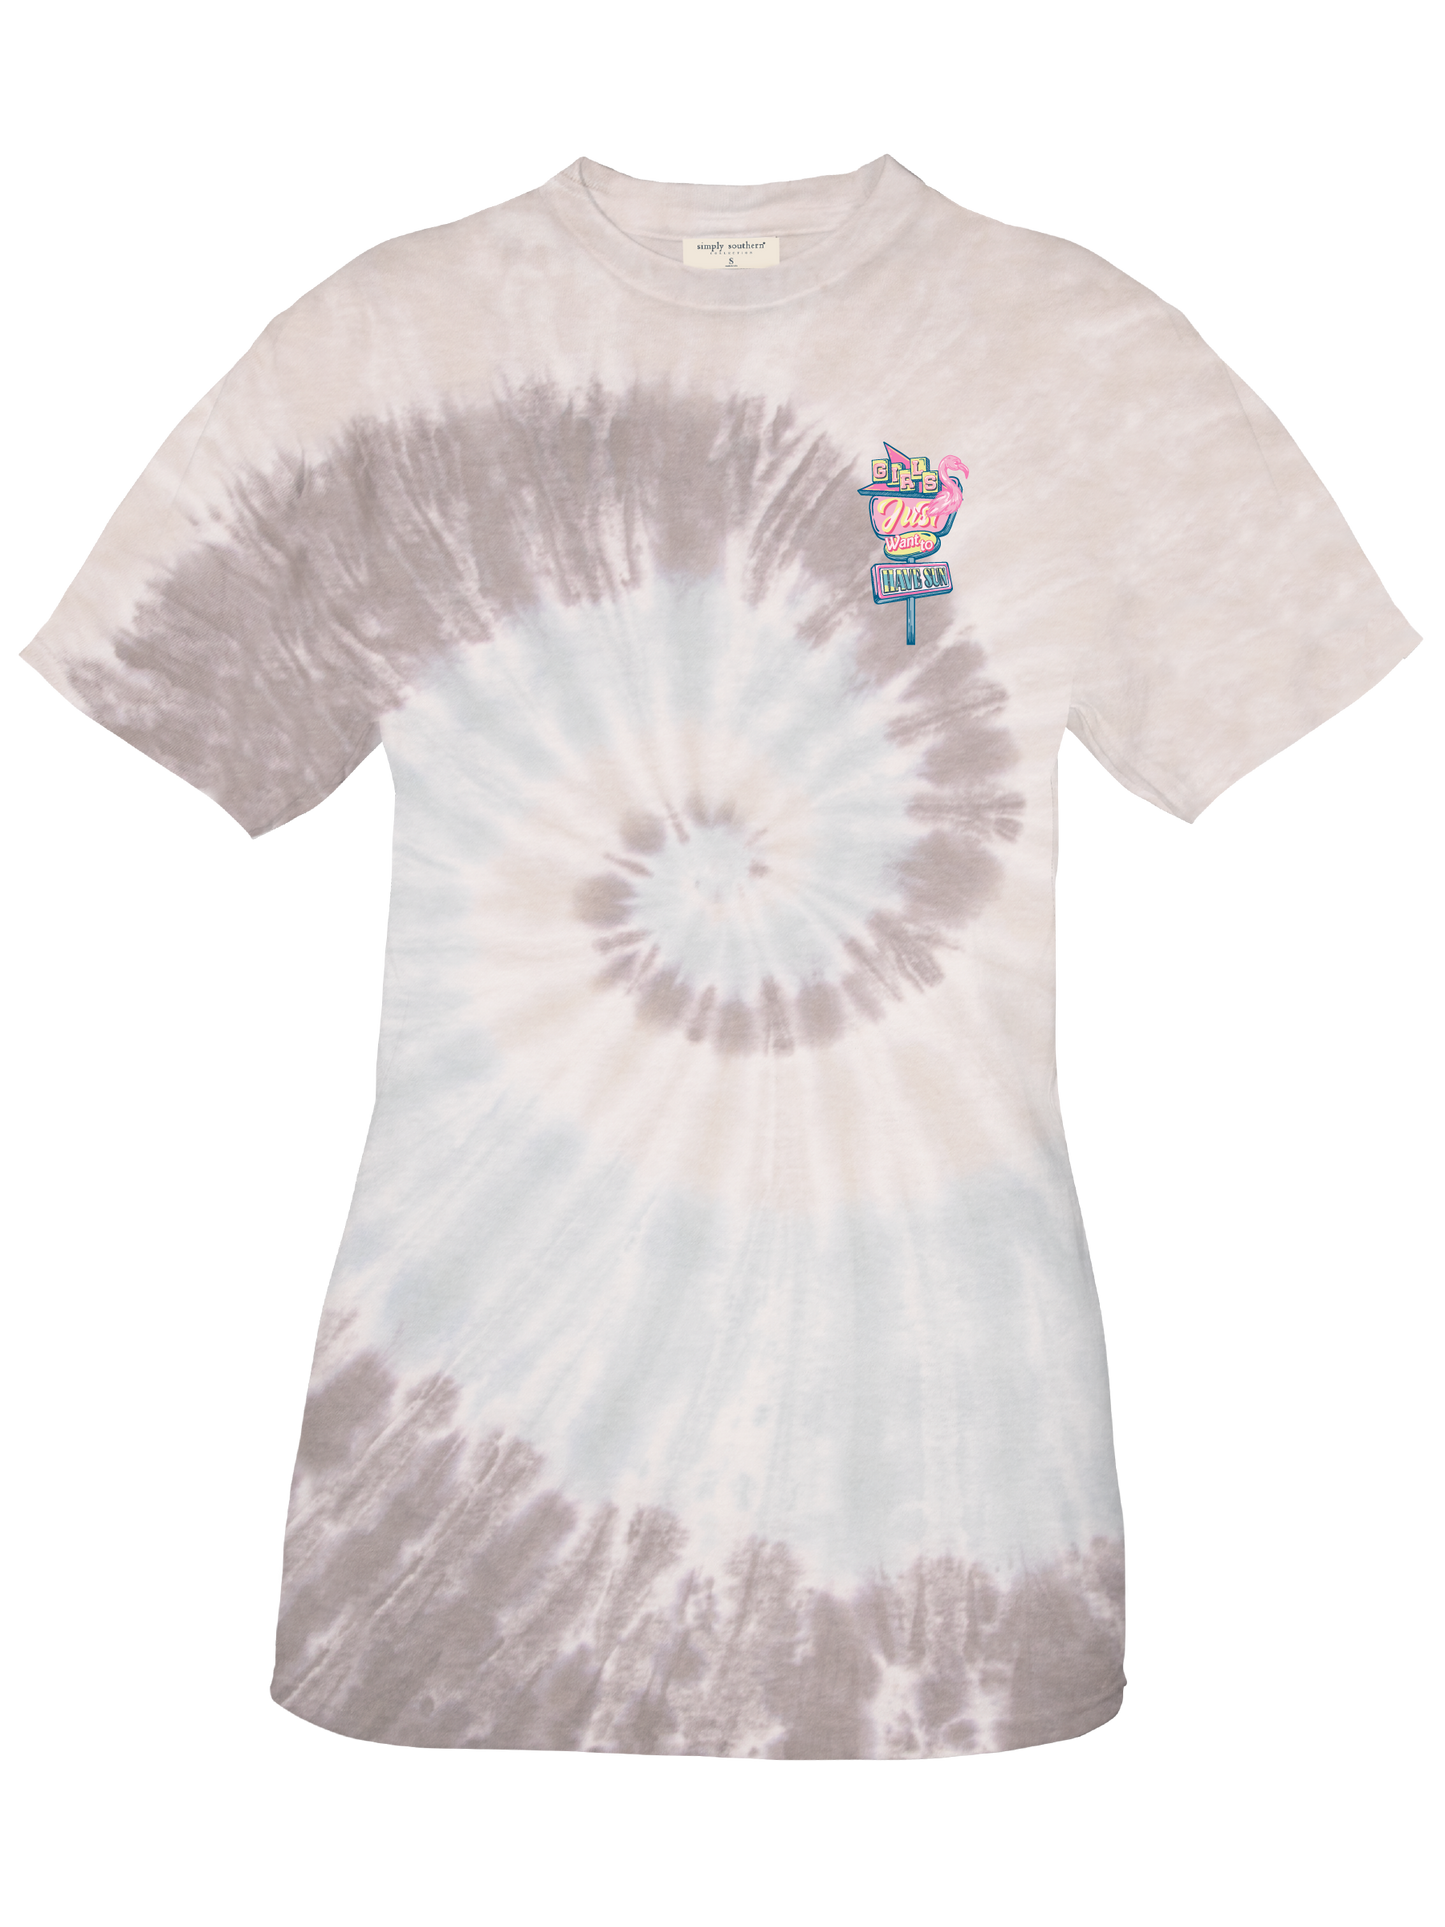 "Girls Just Want to Have Sun" Tie Dye Shirt